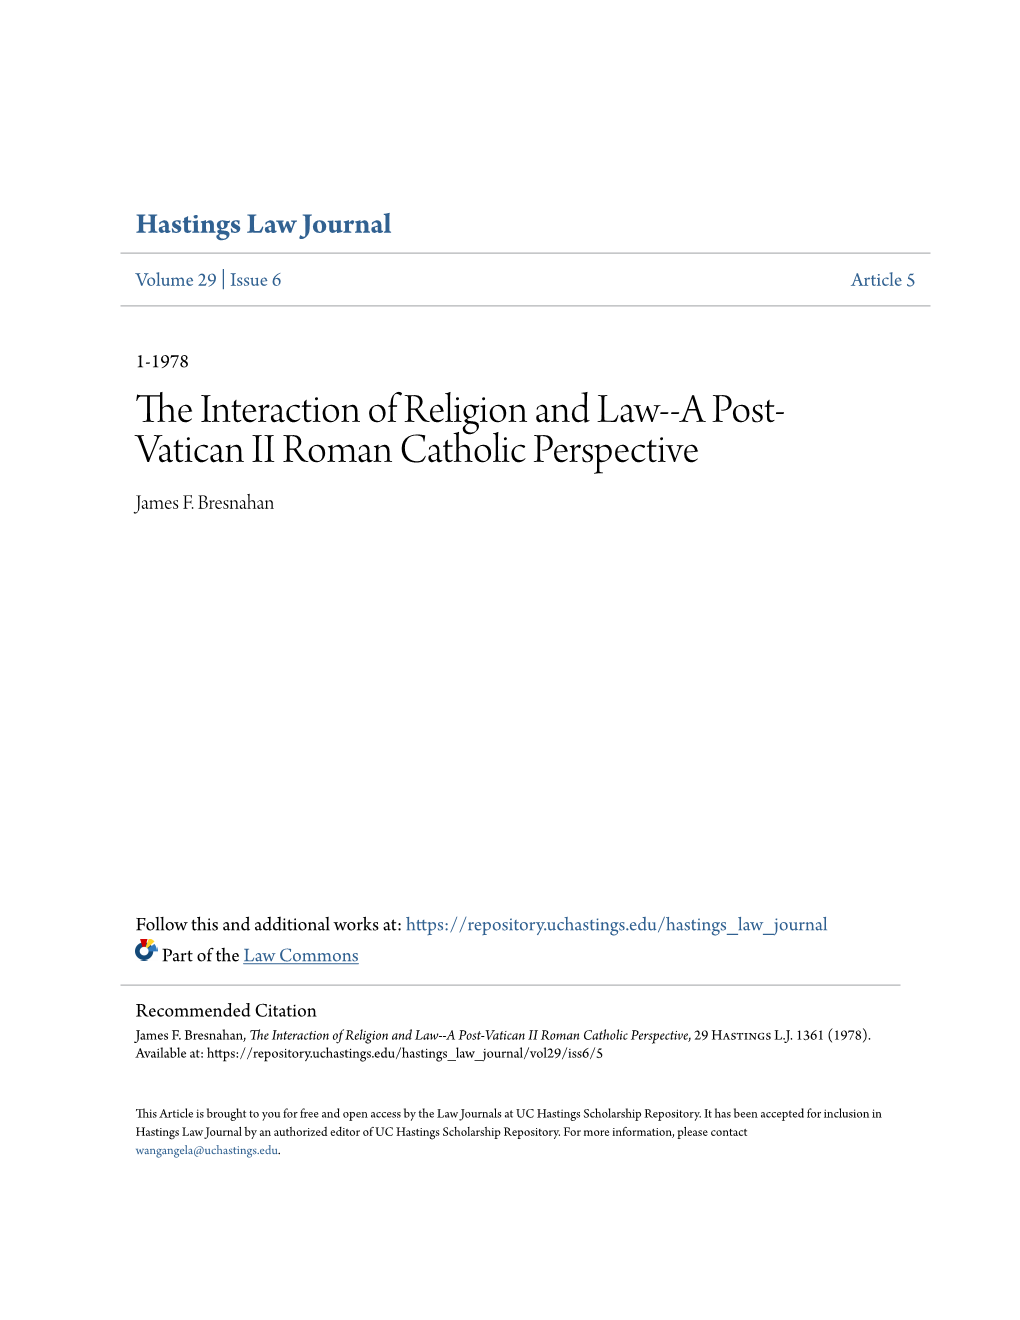 The Interaction of Religion and Law--A Post-Vatican II Roman Catholic Perspective, 29 Hastings L.J